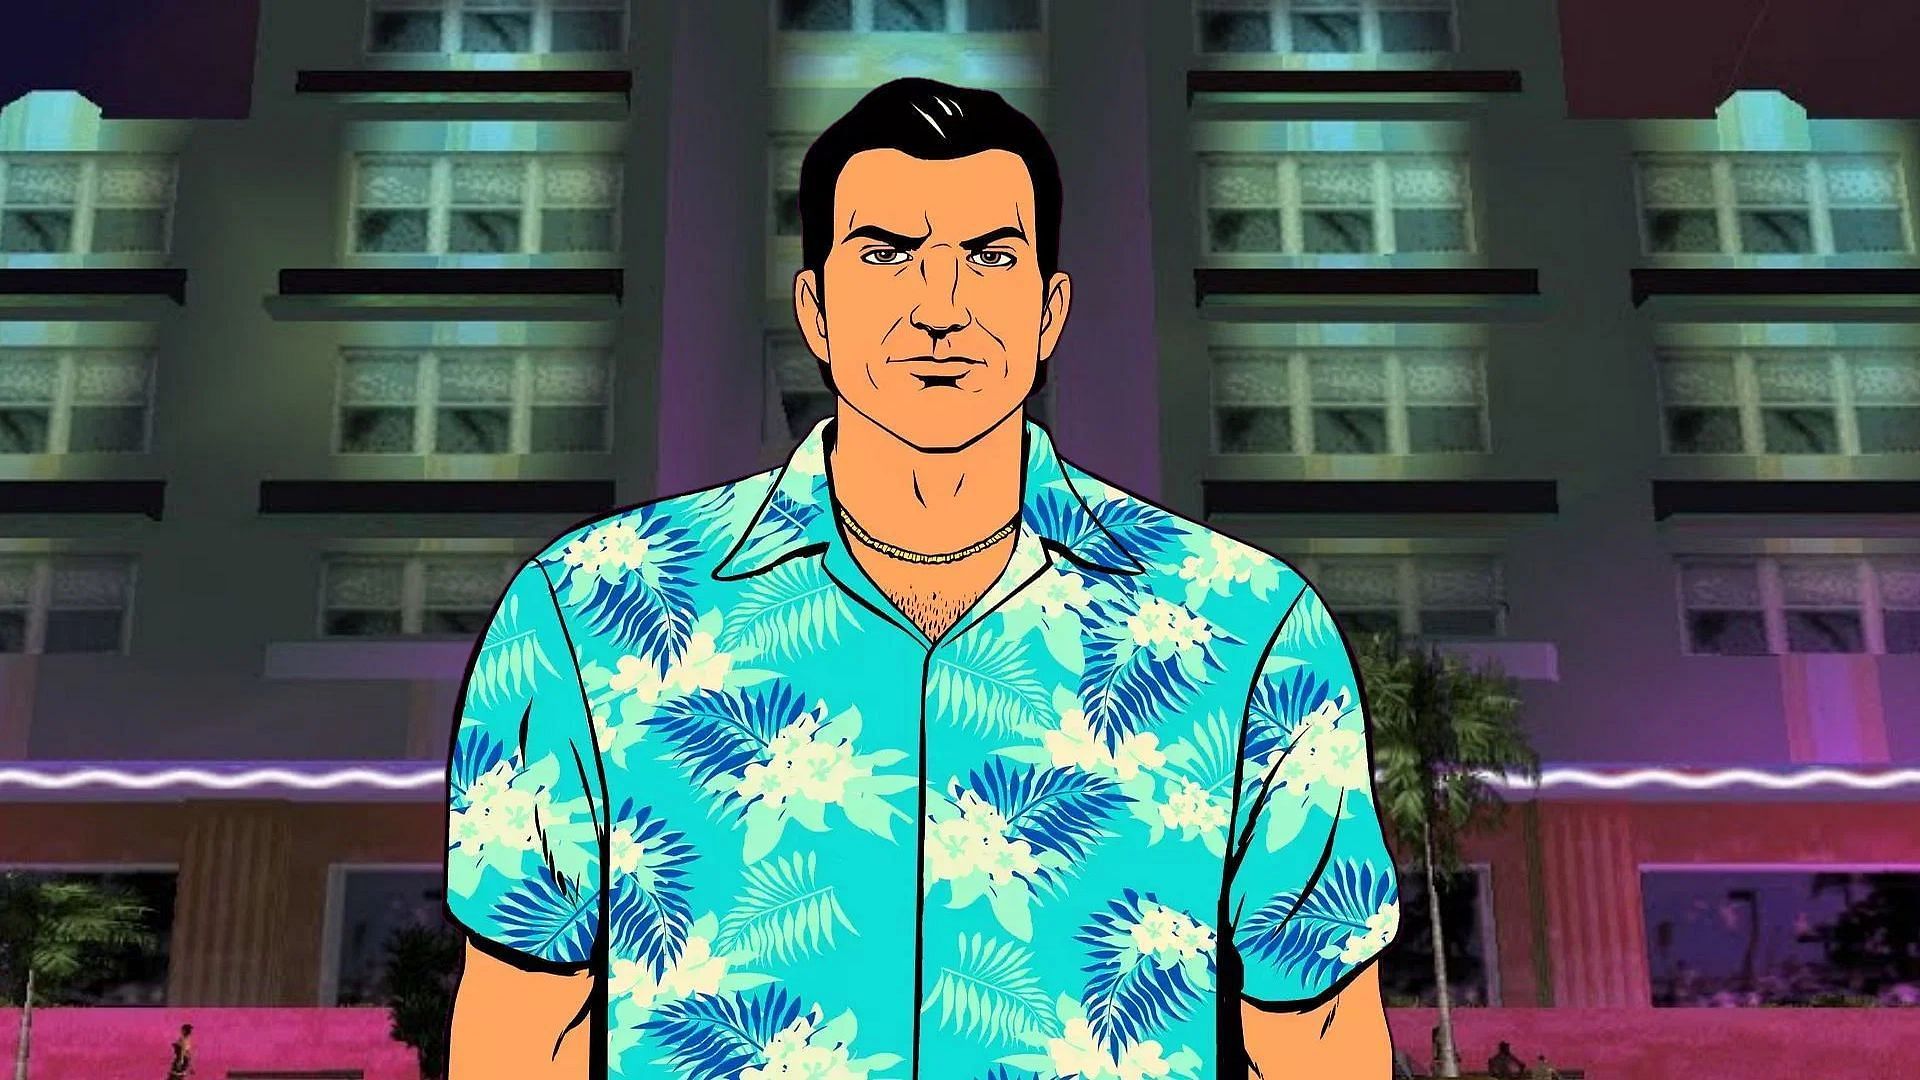 Vice City cheats and mods still has players enjoying the game even after all these years. (Image via Rockstar Games)